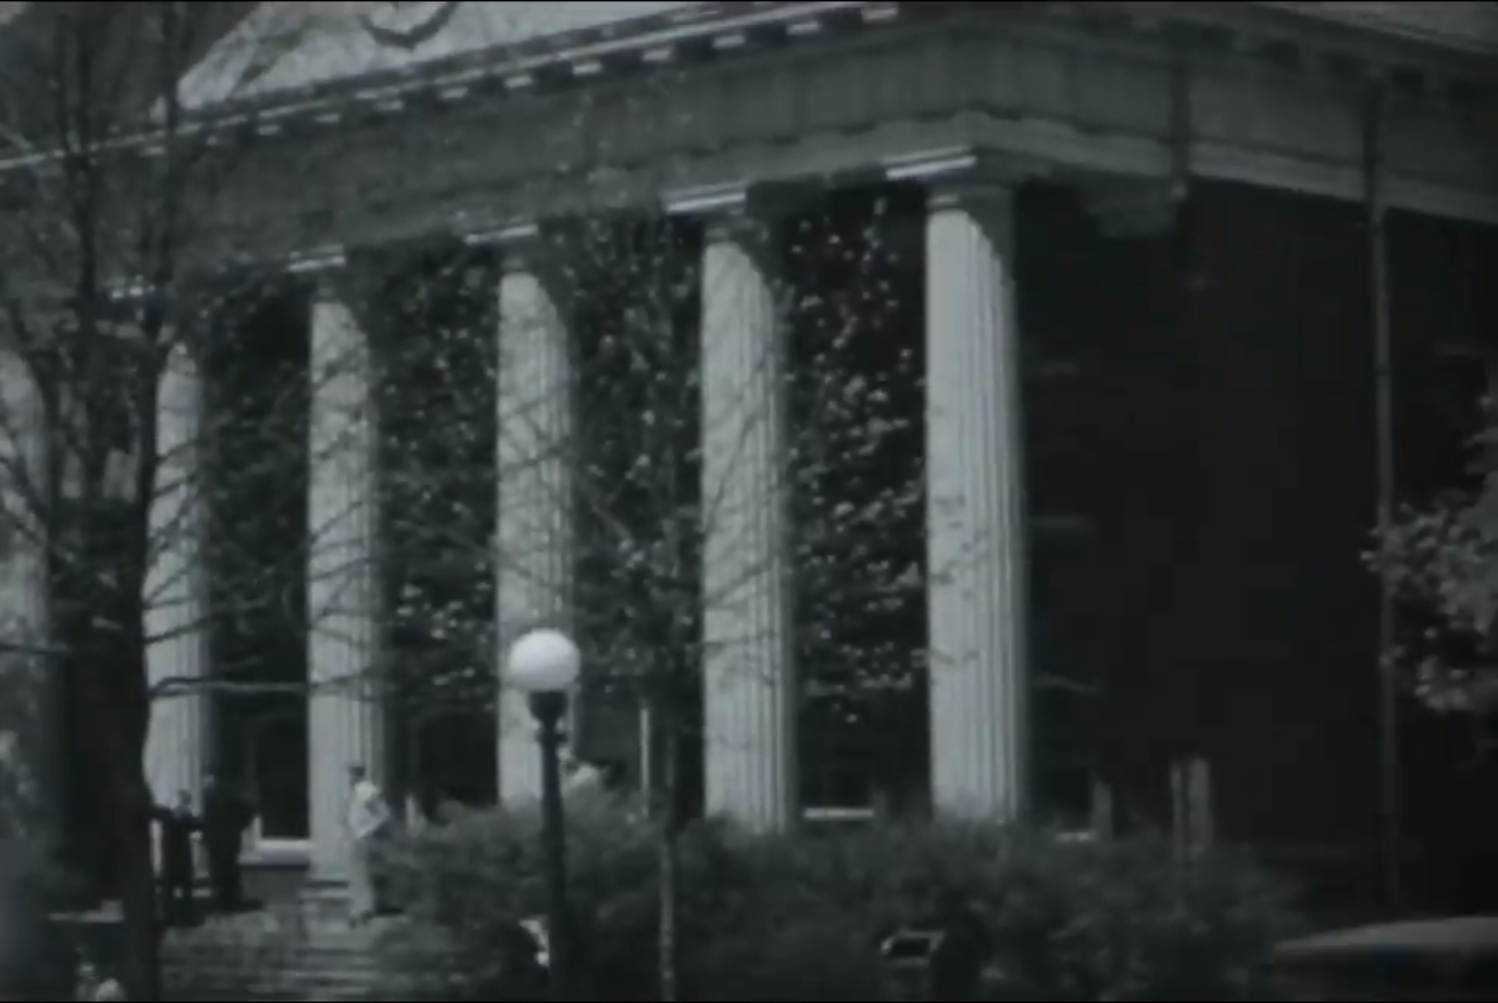 Check out this awesome archival footage of U of I from the 1930’s